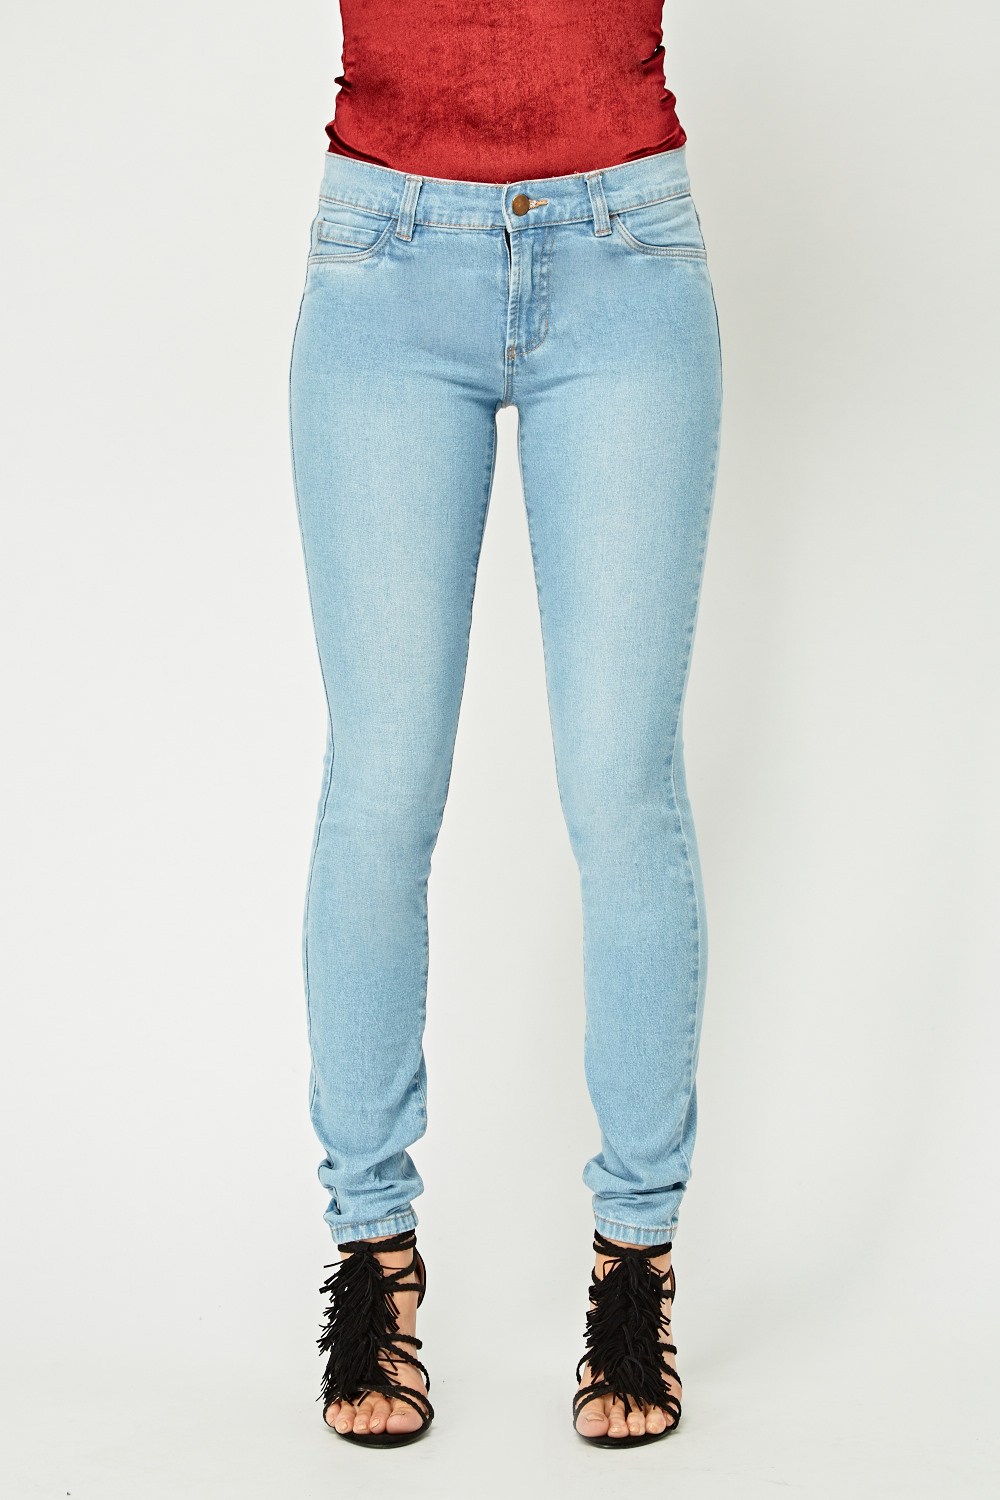 Low Rise Skinny Jeans Just 7